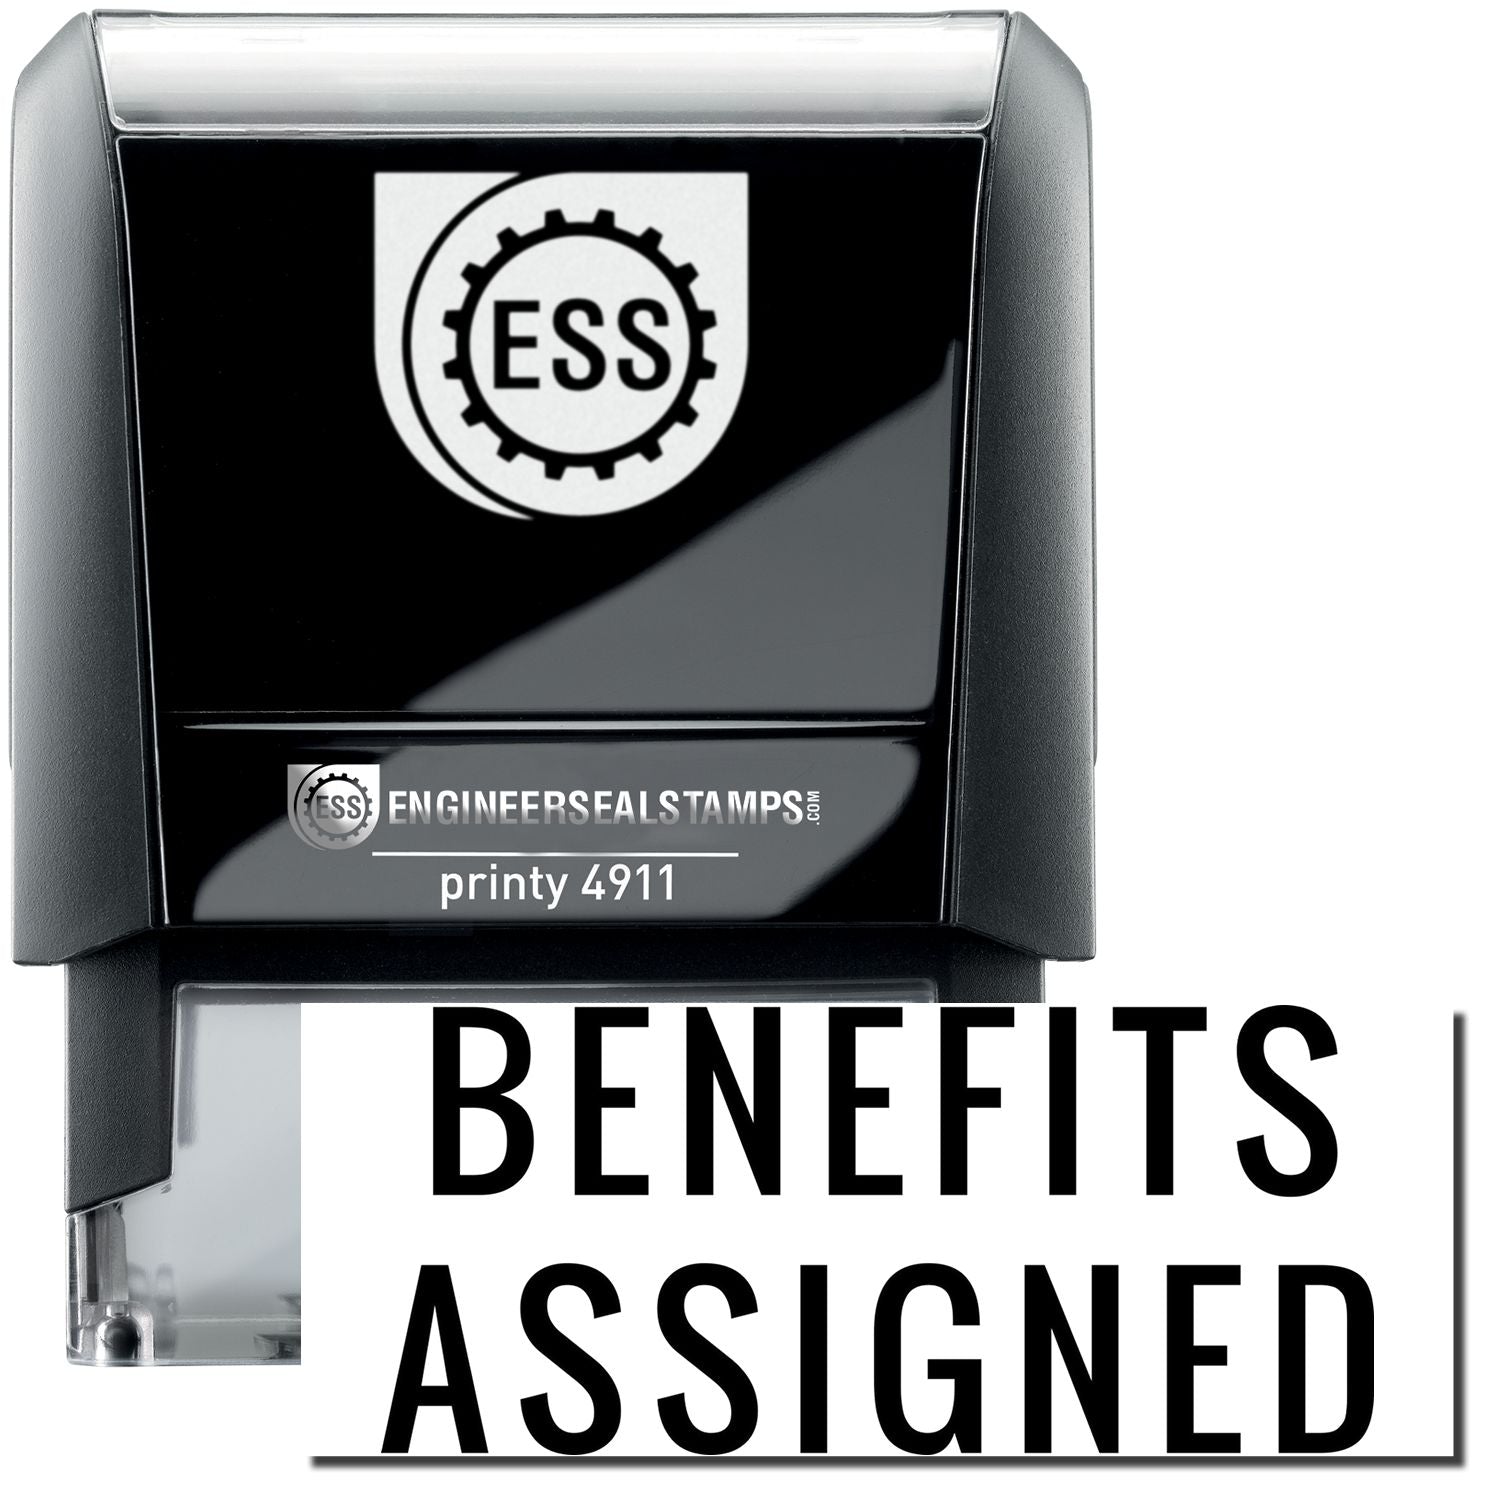 A self-inking stamp with a stamped image showing how the text "BENEFITS ASSIGNED" in a narrow font is displayed after stamping.